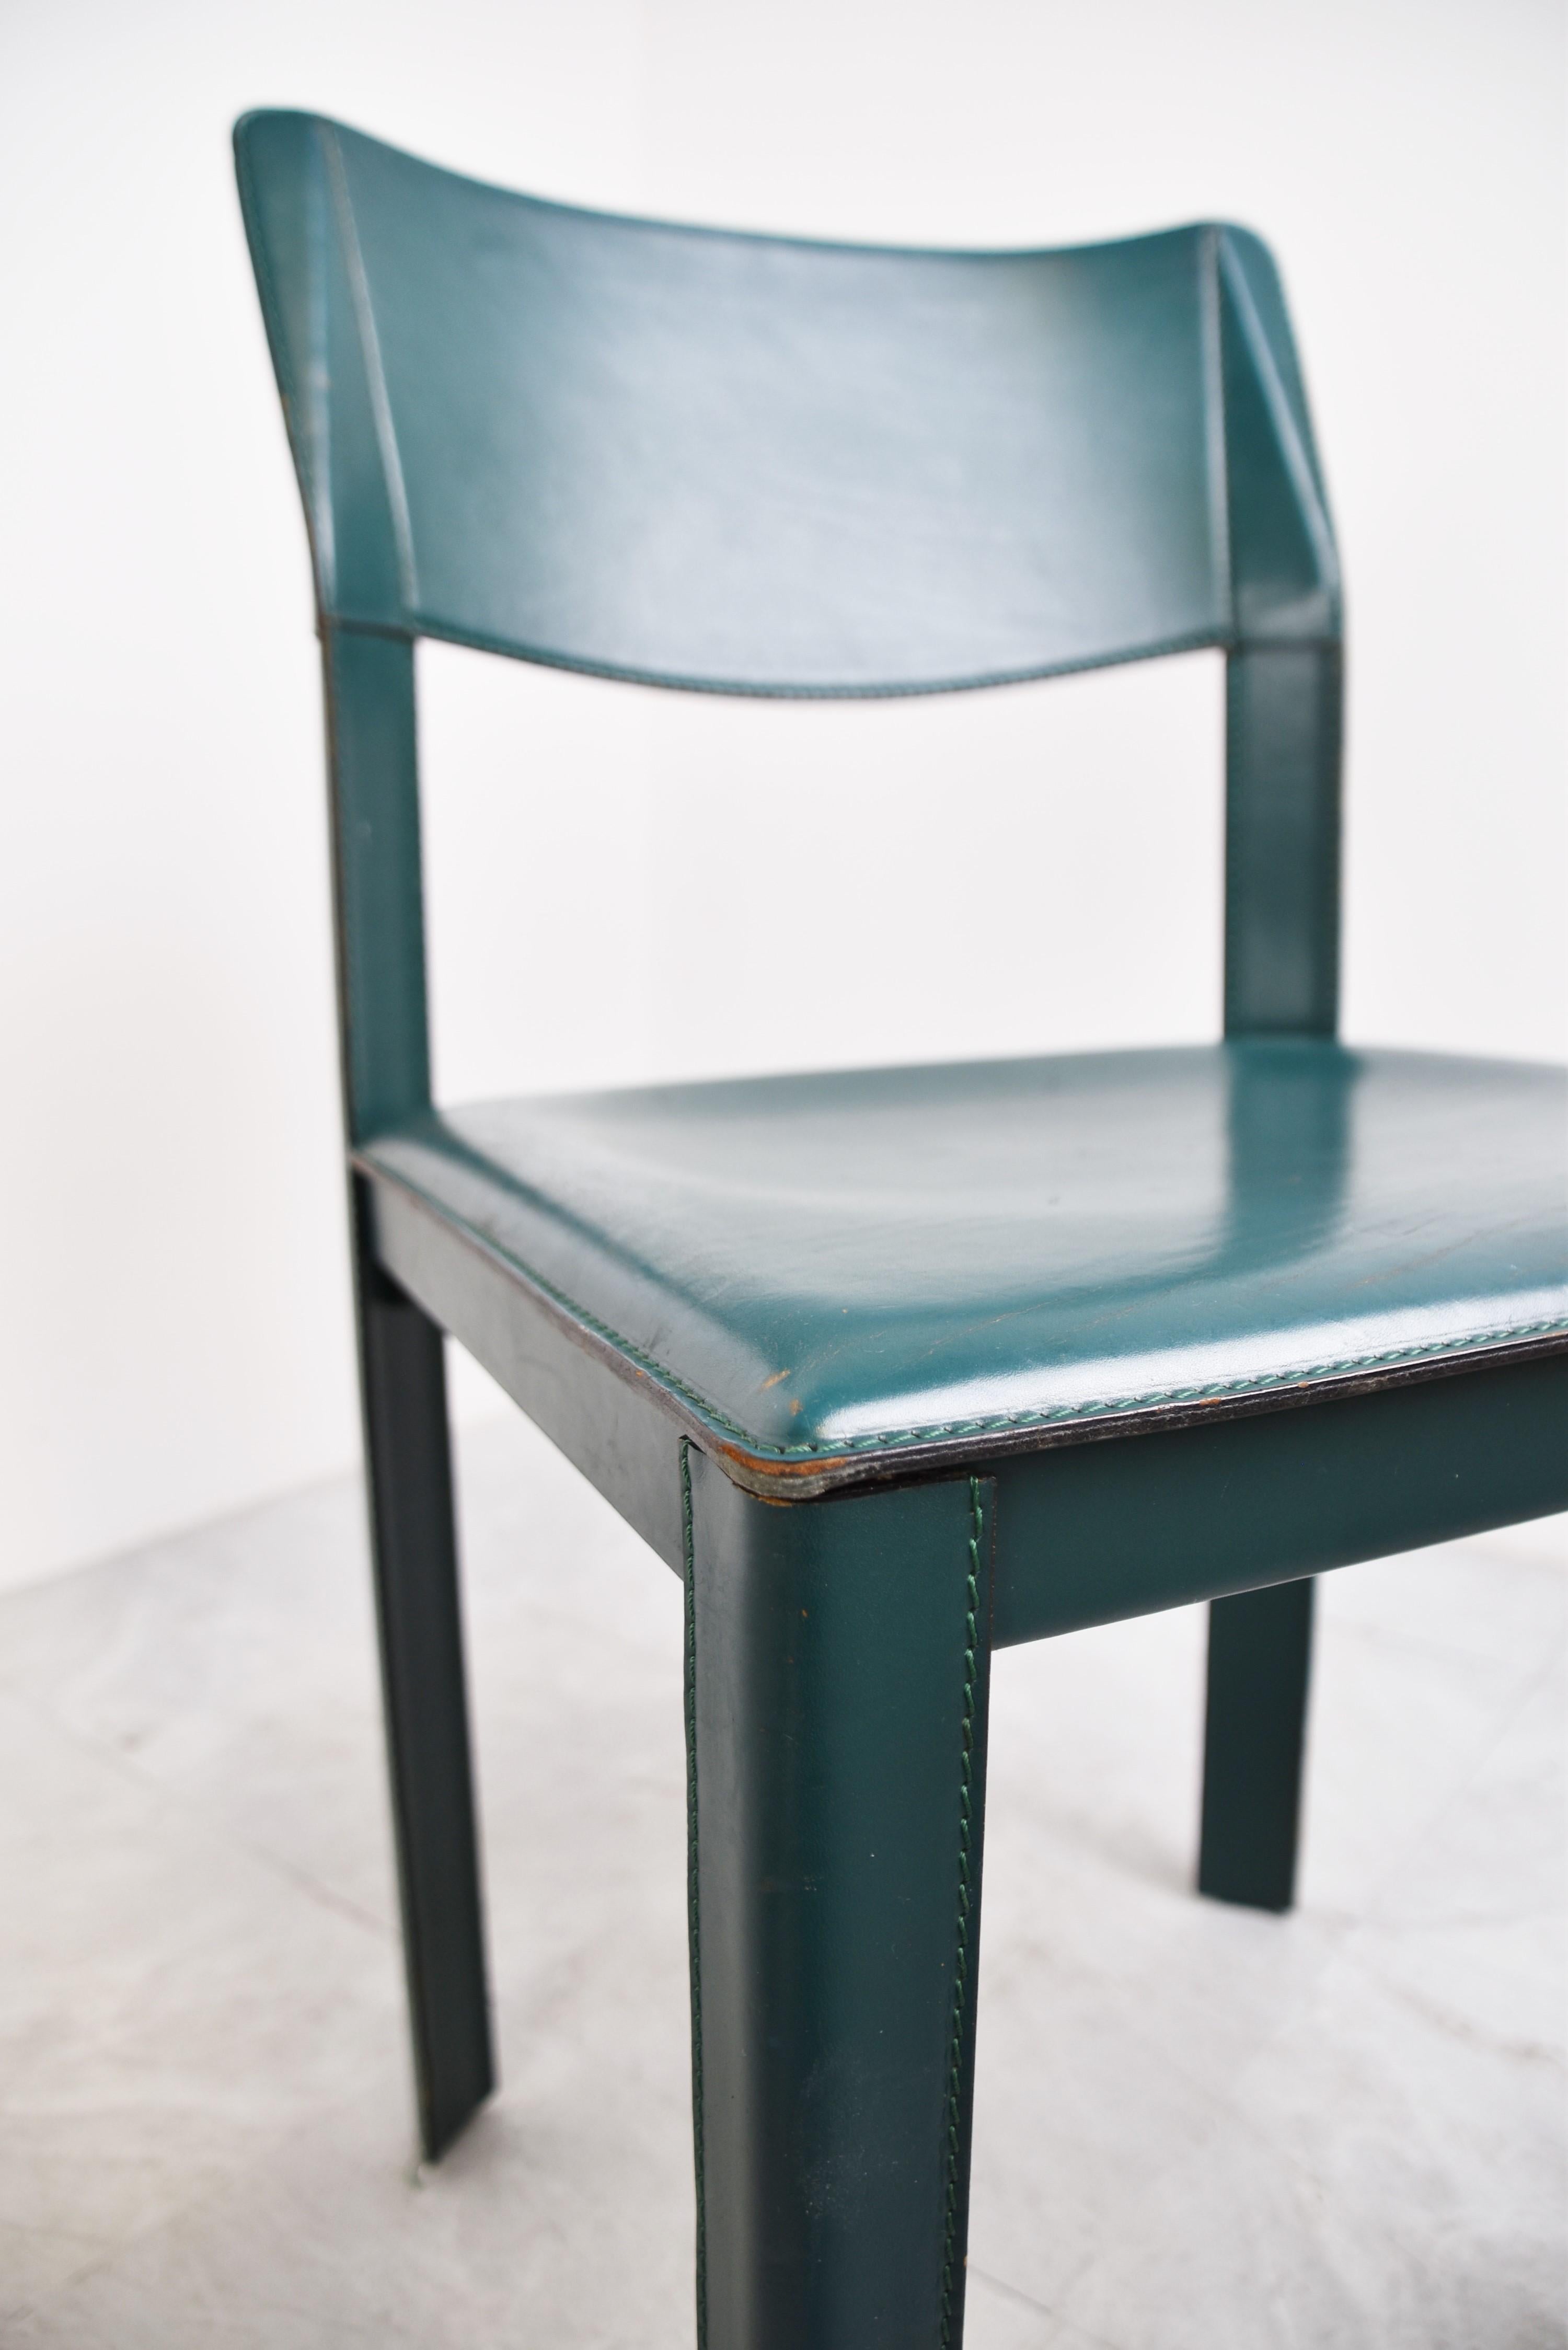 Vintage green leather dining chairs.

High quality and sturdy stiched leather dining chairs with a timeless design. 

Overall good condition with age related wear, some more wear to the legs, but the chairs still look attractive

1970s -